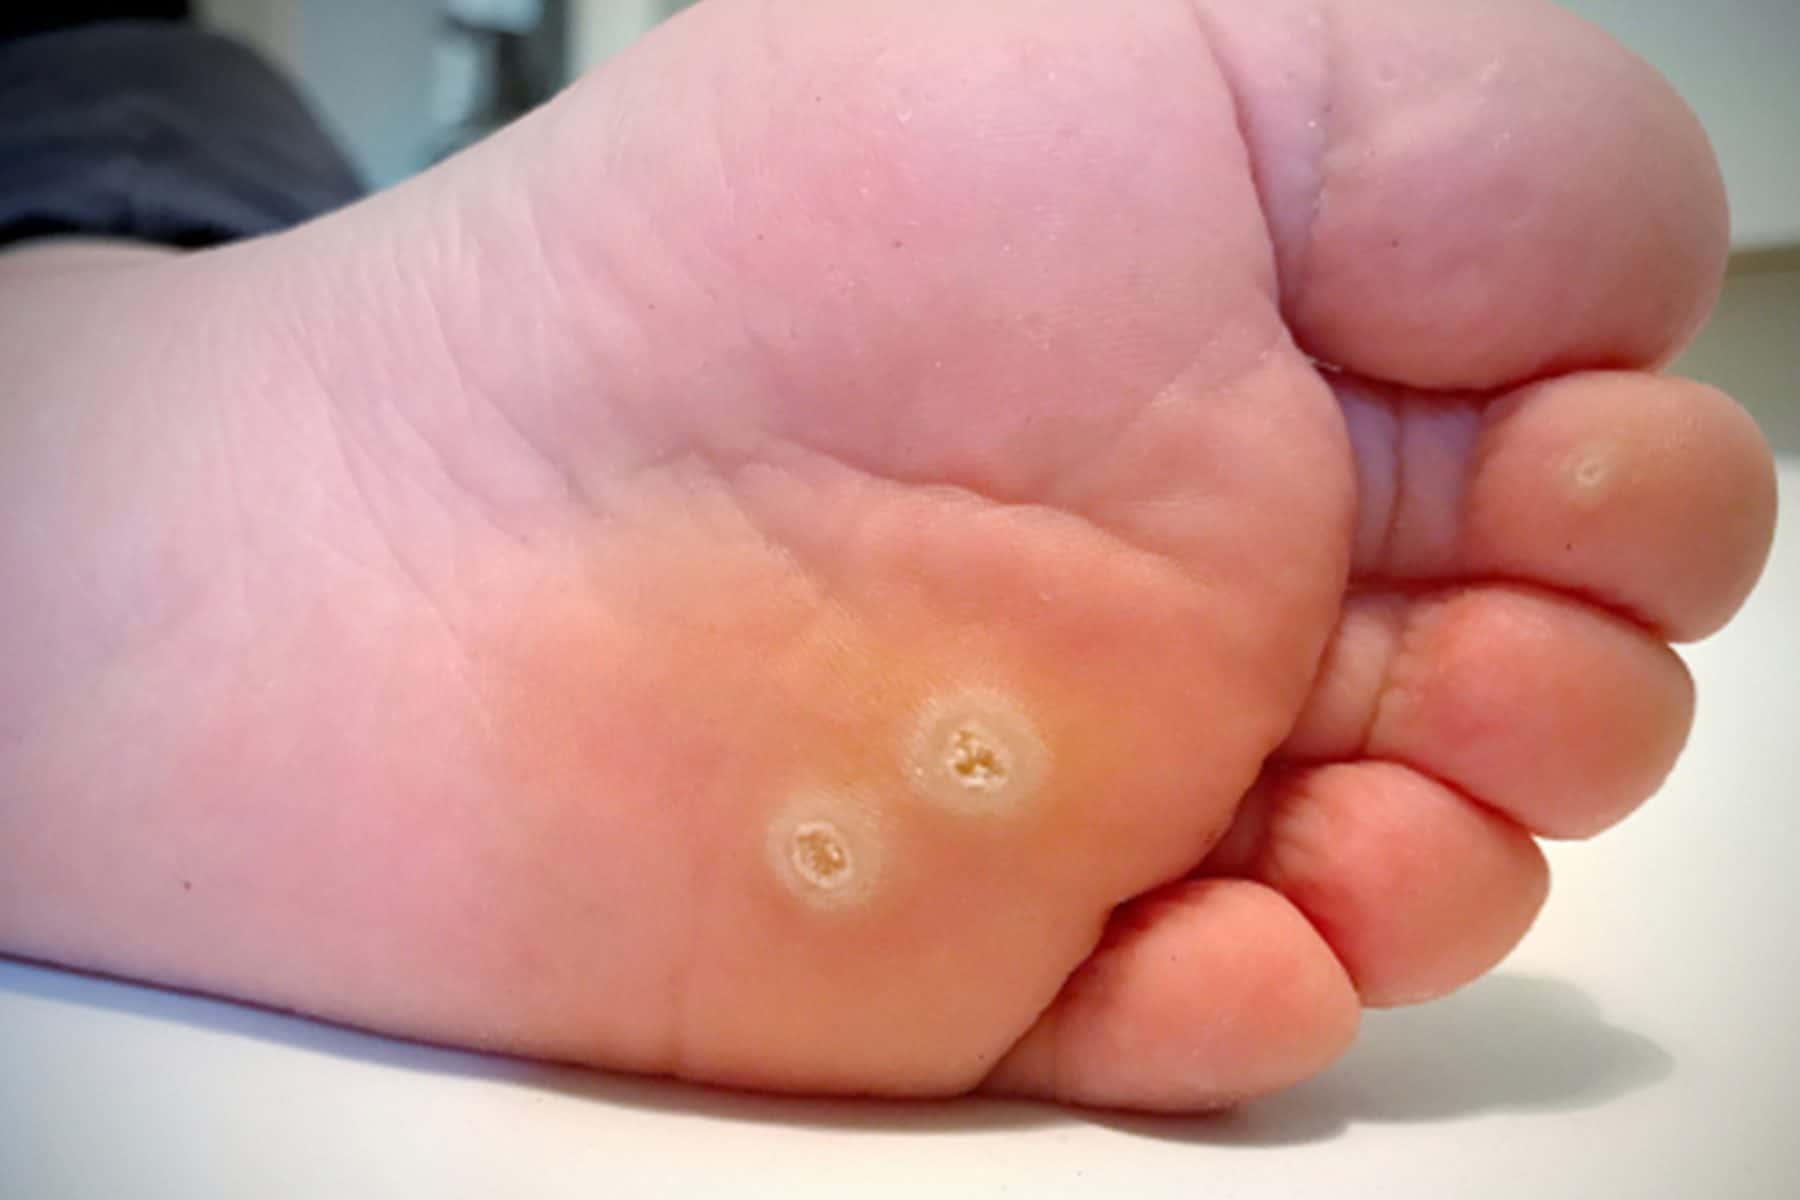 wart under foot removal)